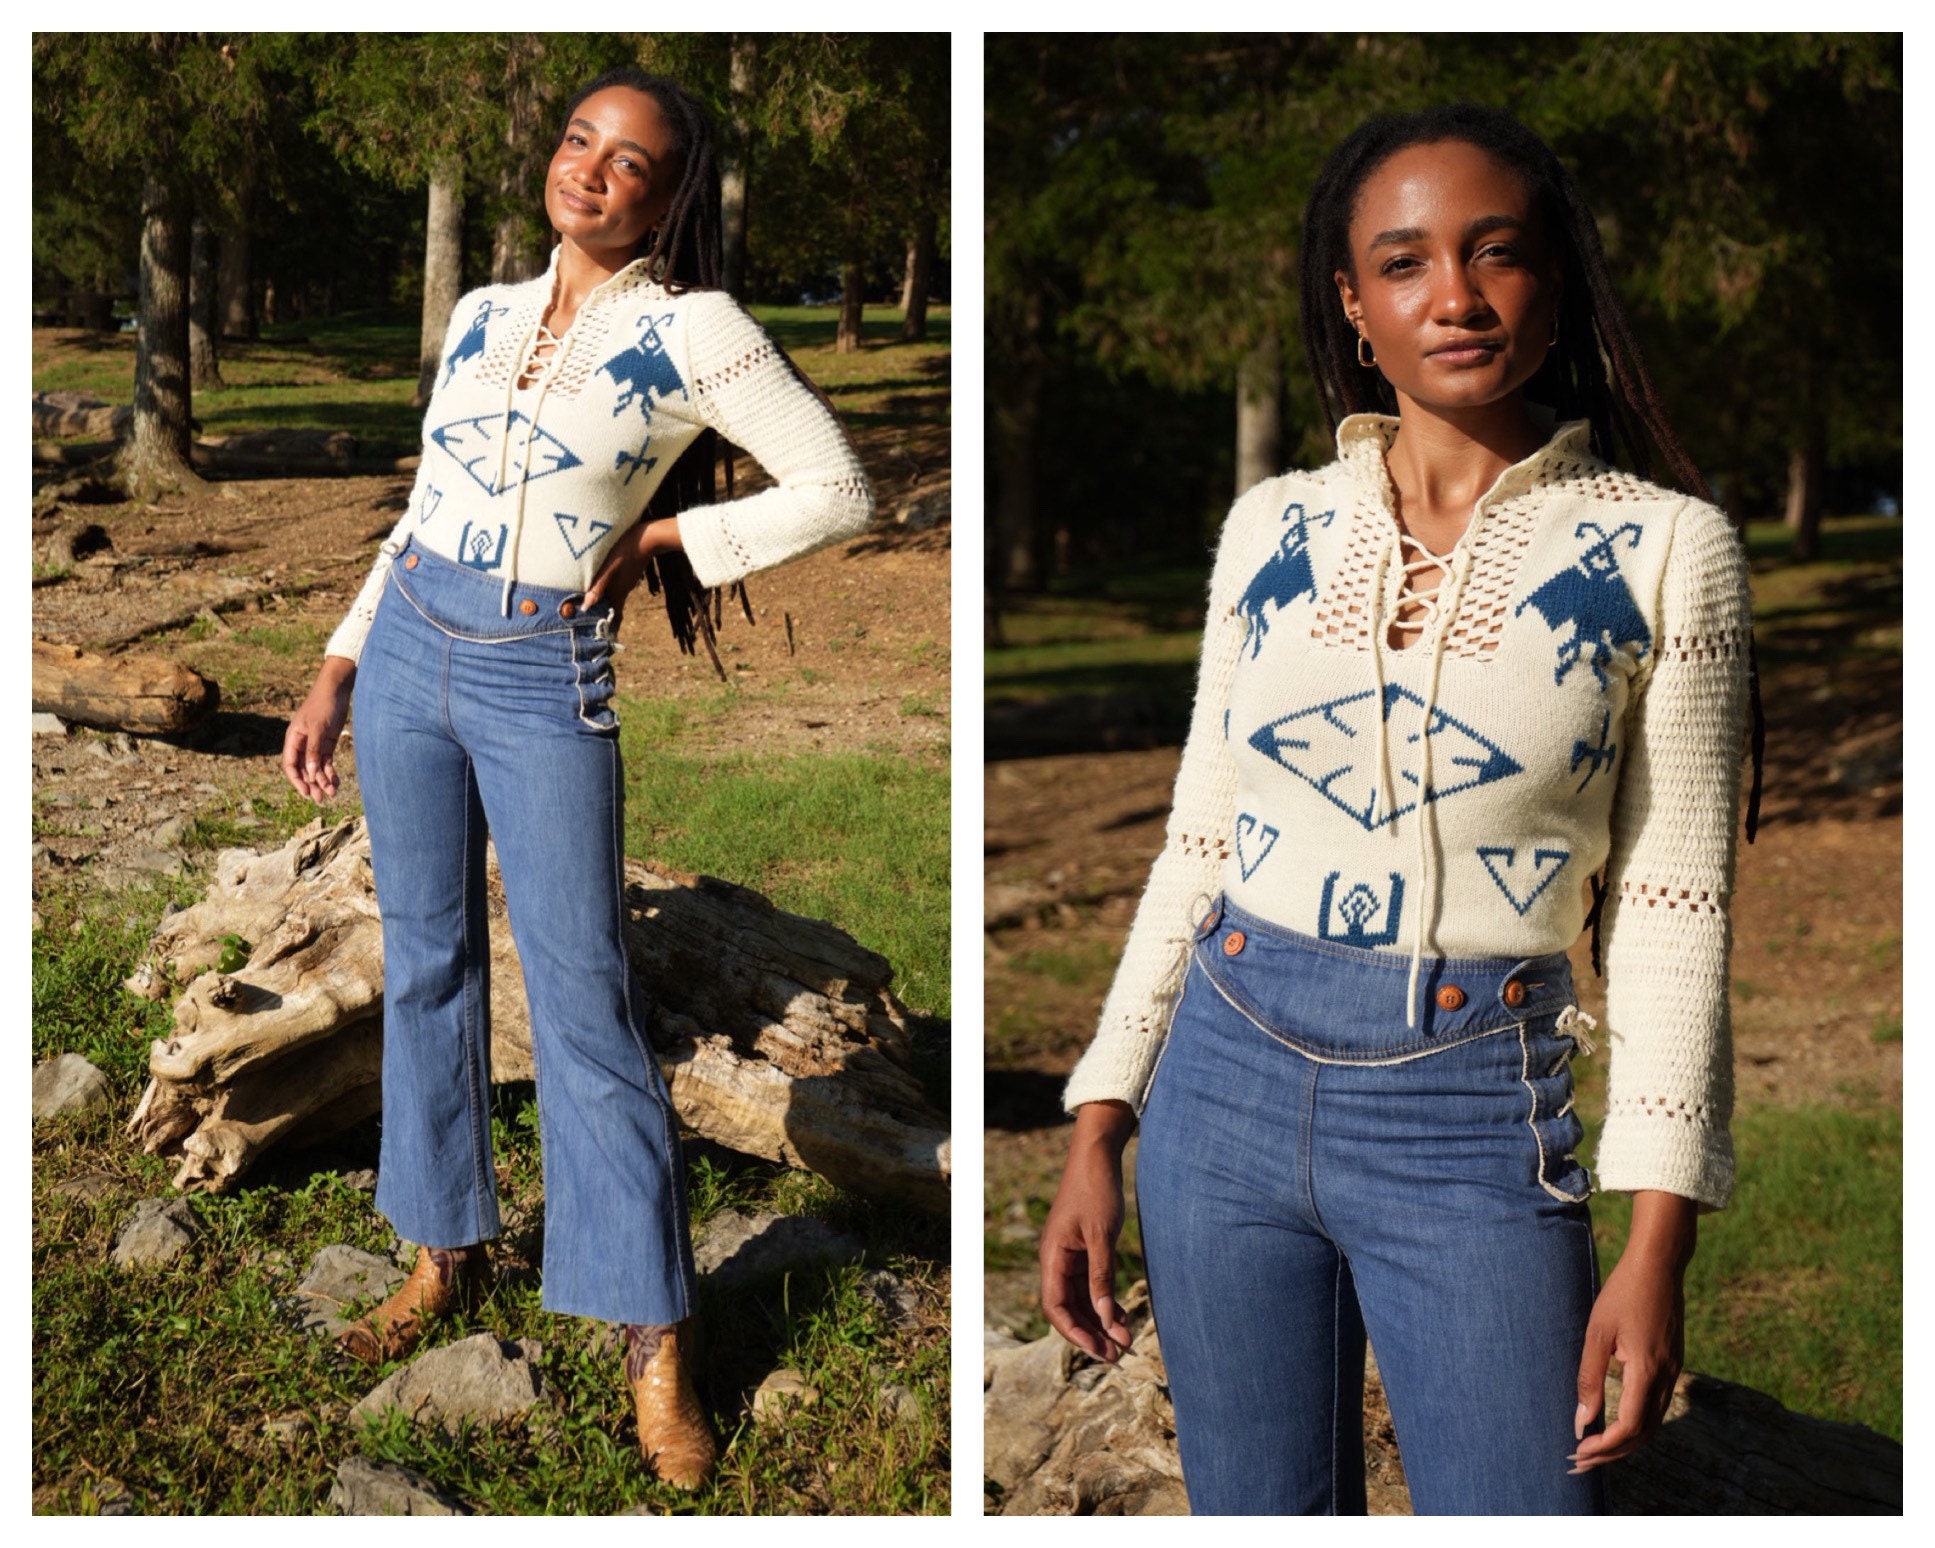 1970's Bell Bottom Jeans / Haute Hippie Denim / Lace up Sides Bell